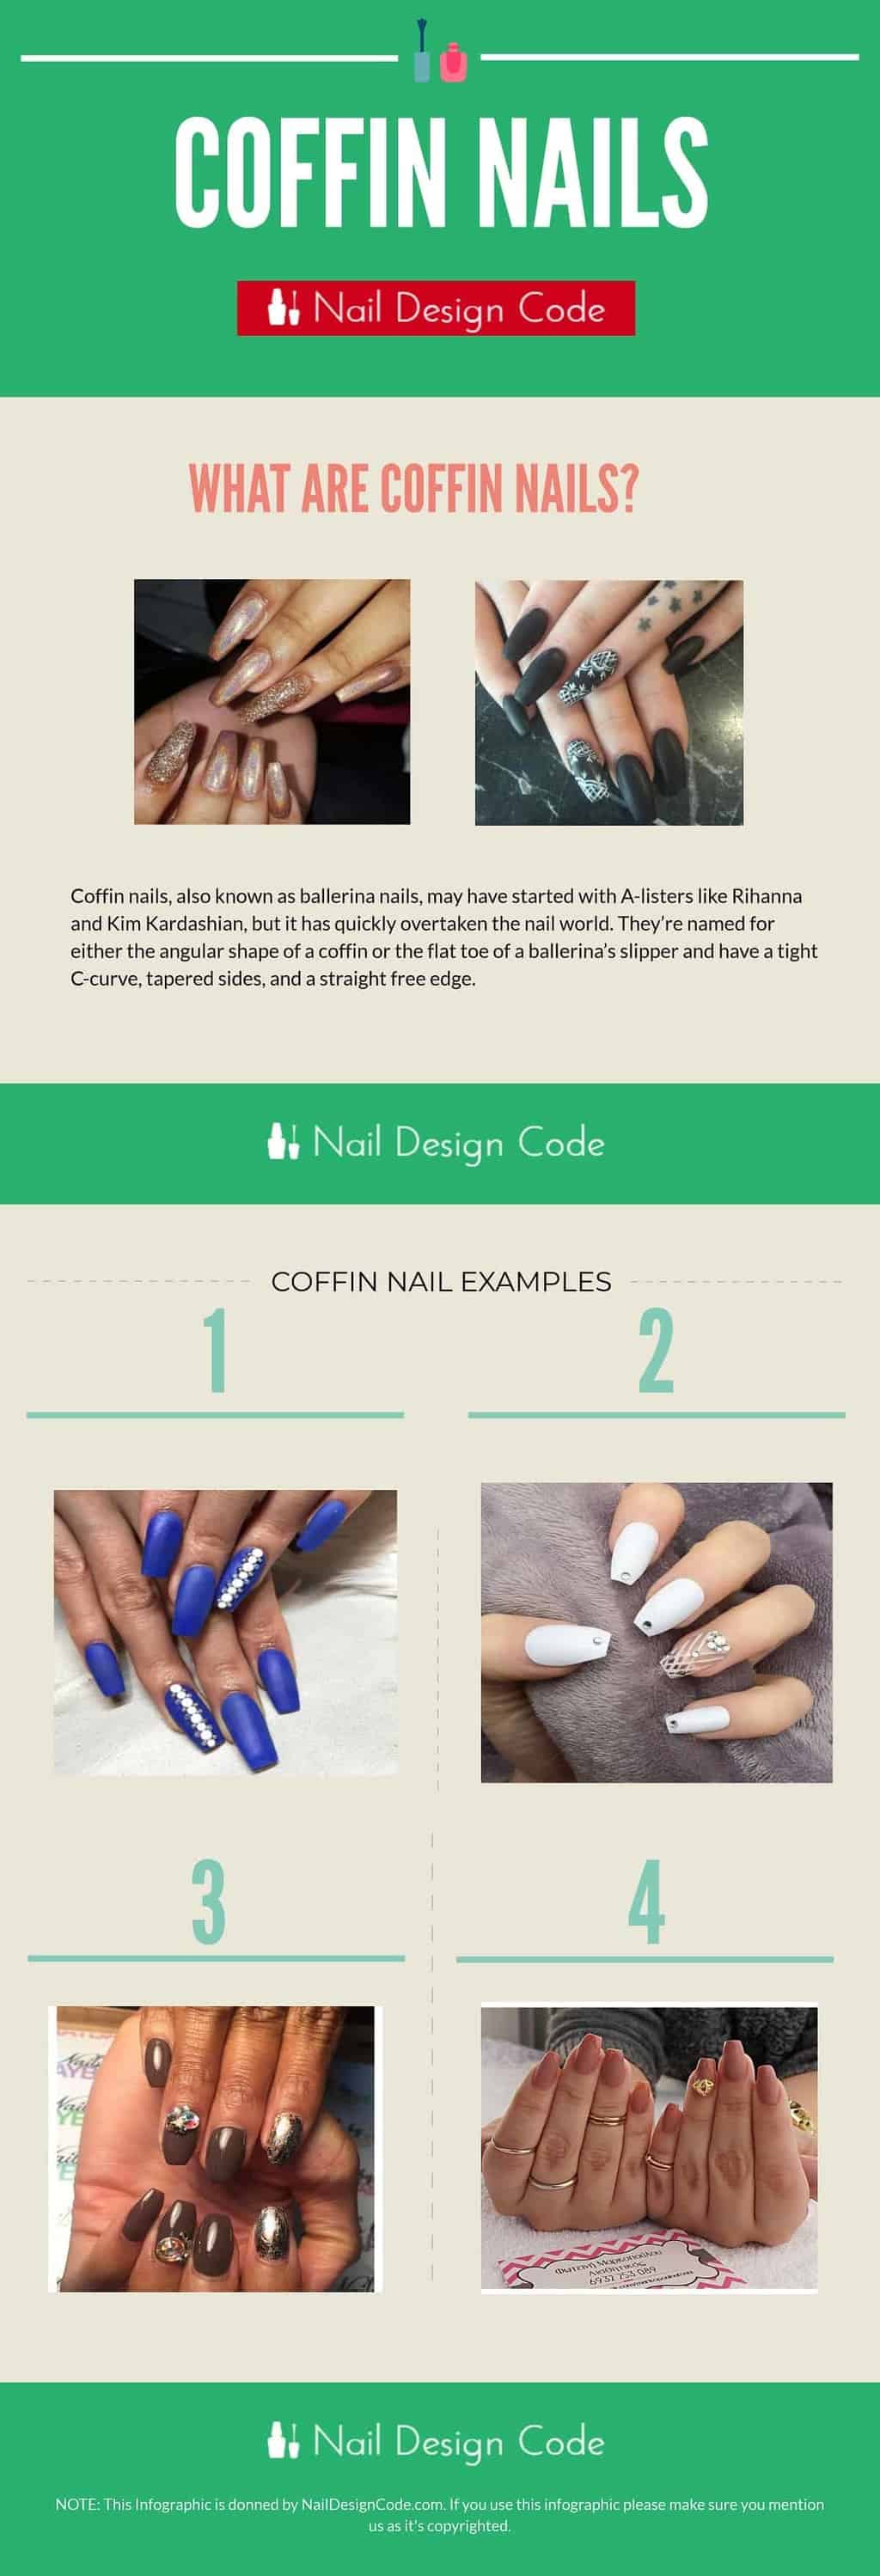 coffin nails infographic